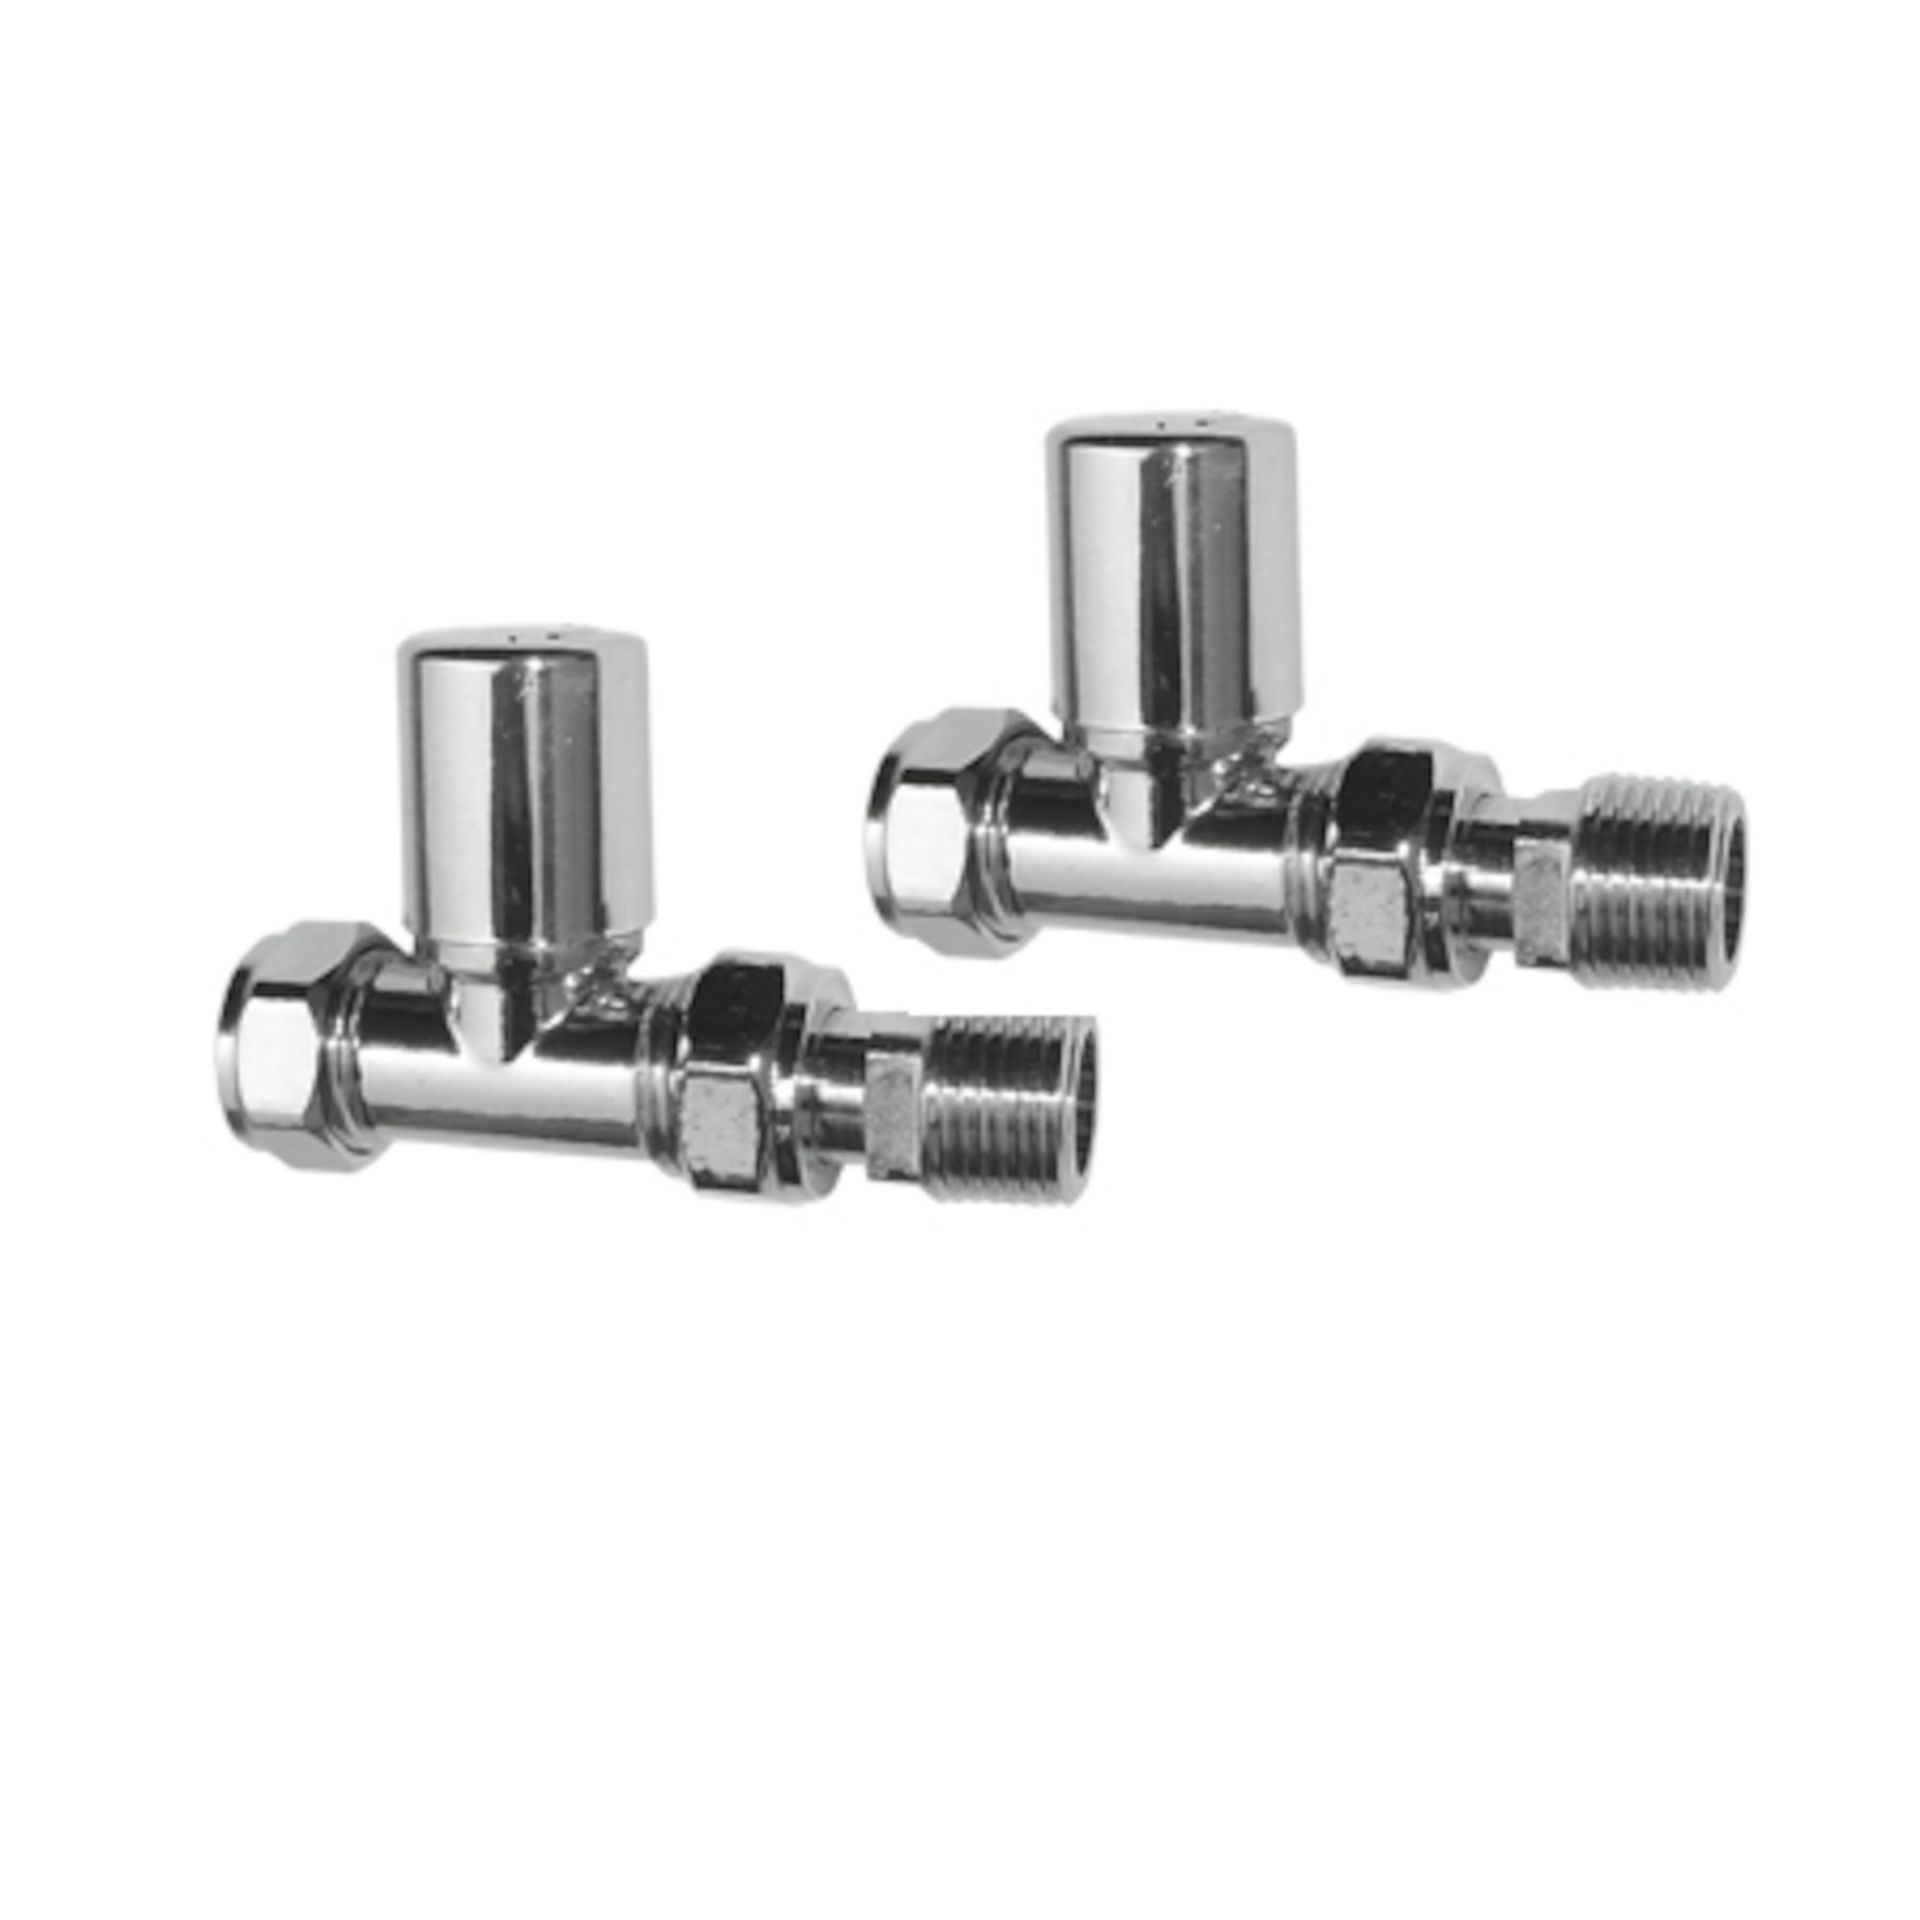 (CP101) Standard 15mm Connection Straight Chrome Radiator Valves Chrome Plated Solid Brass